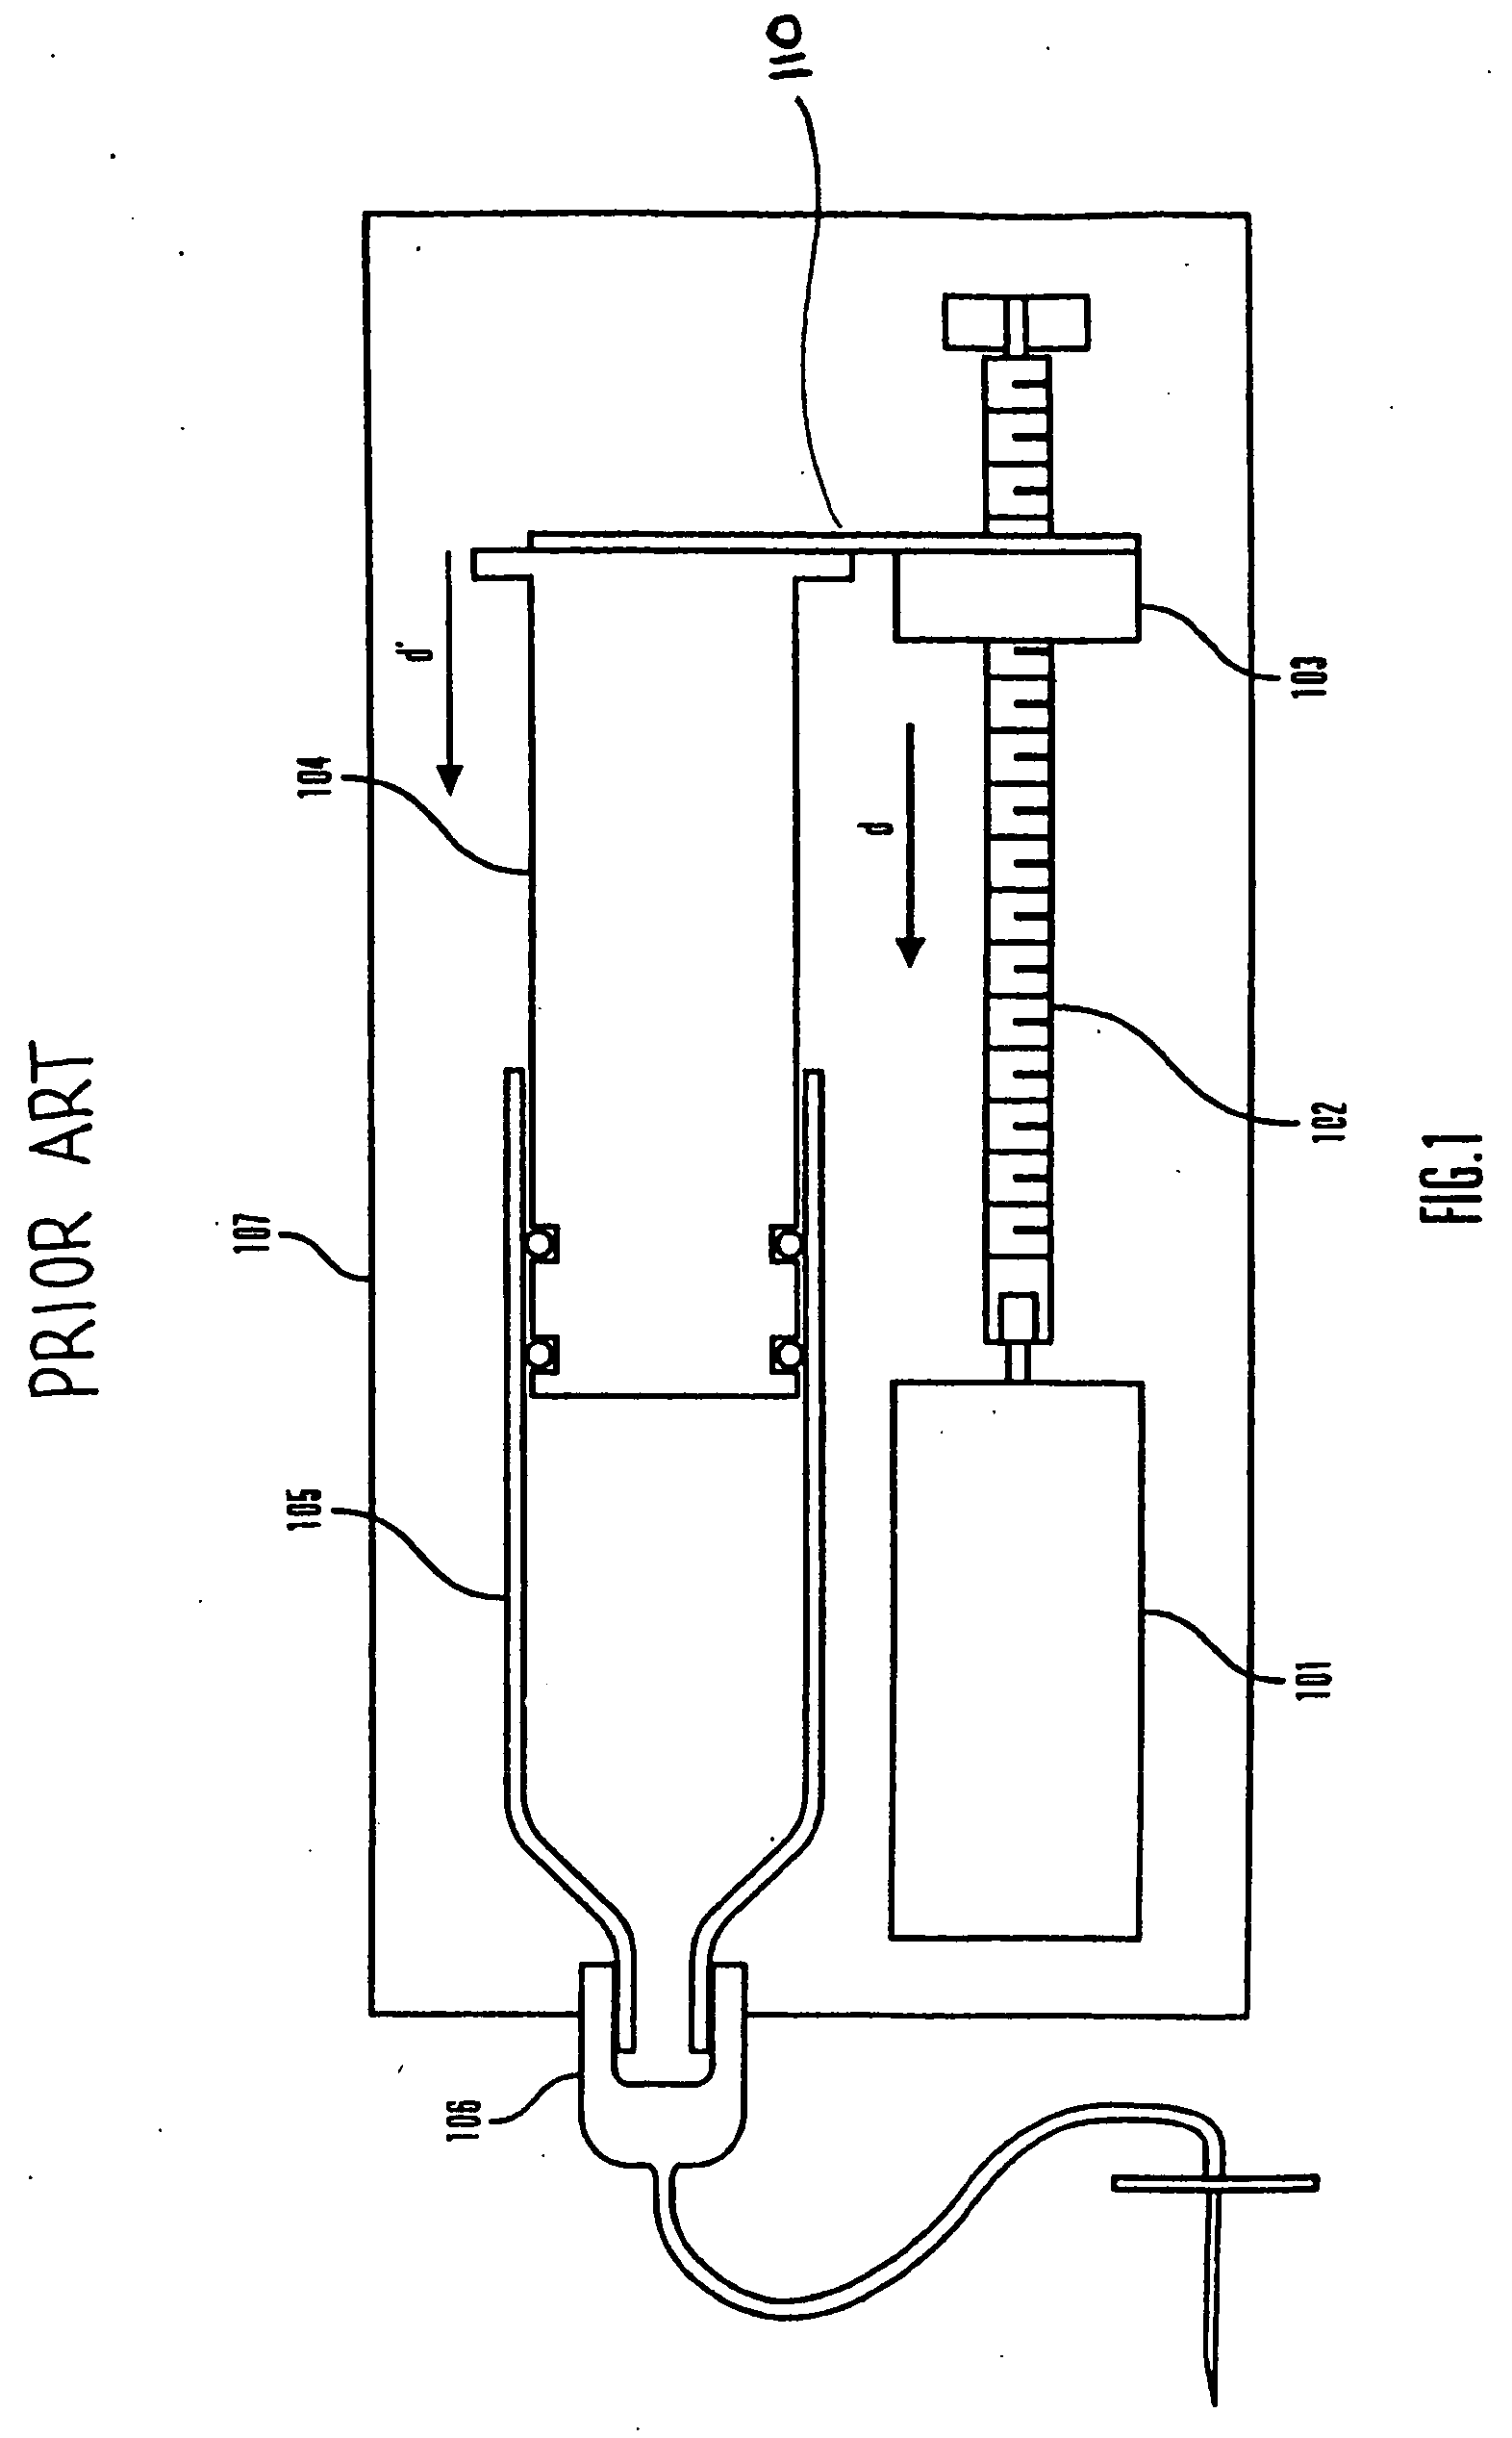 Methods and apparatuses for detecting occlusions in an ambulatory infusion pump